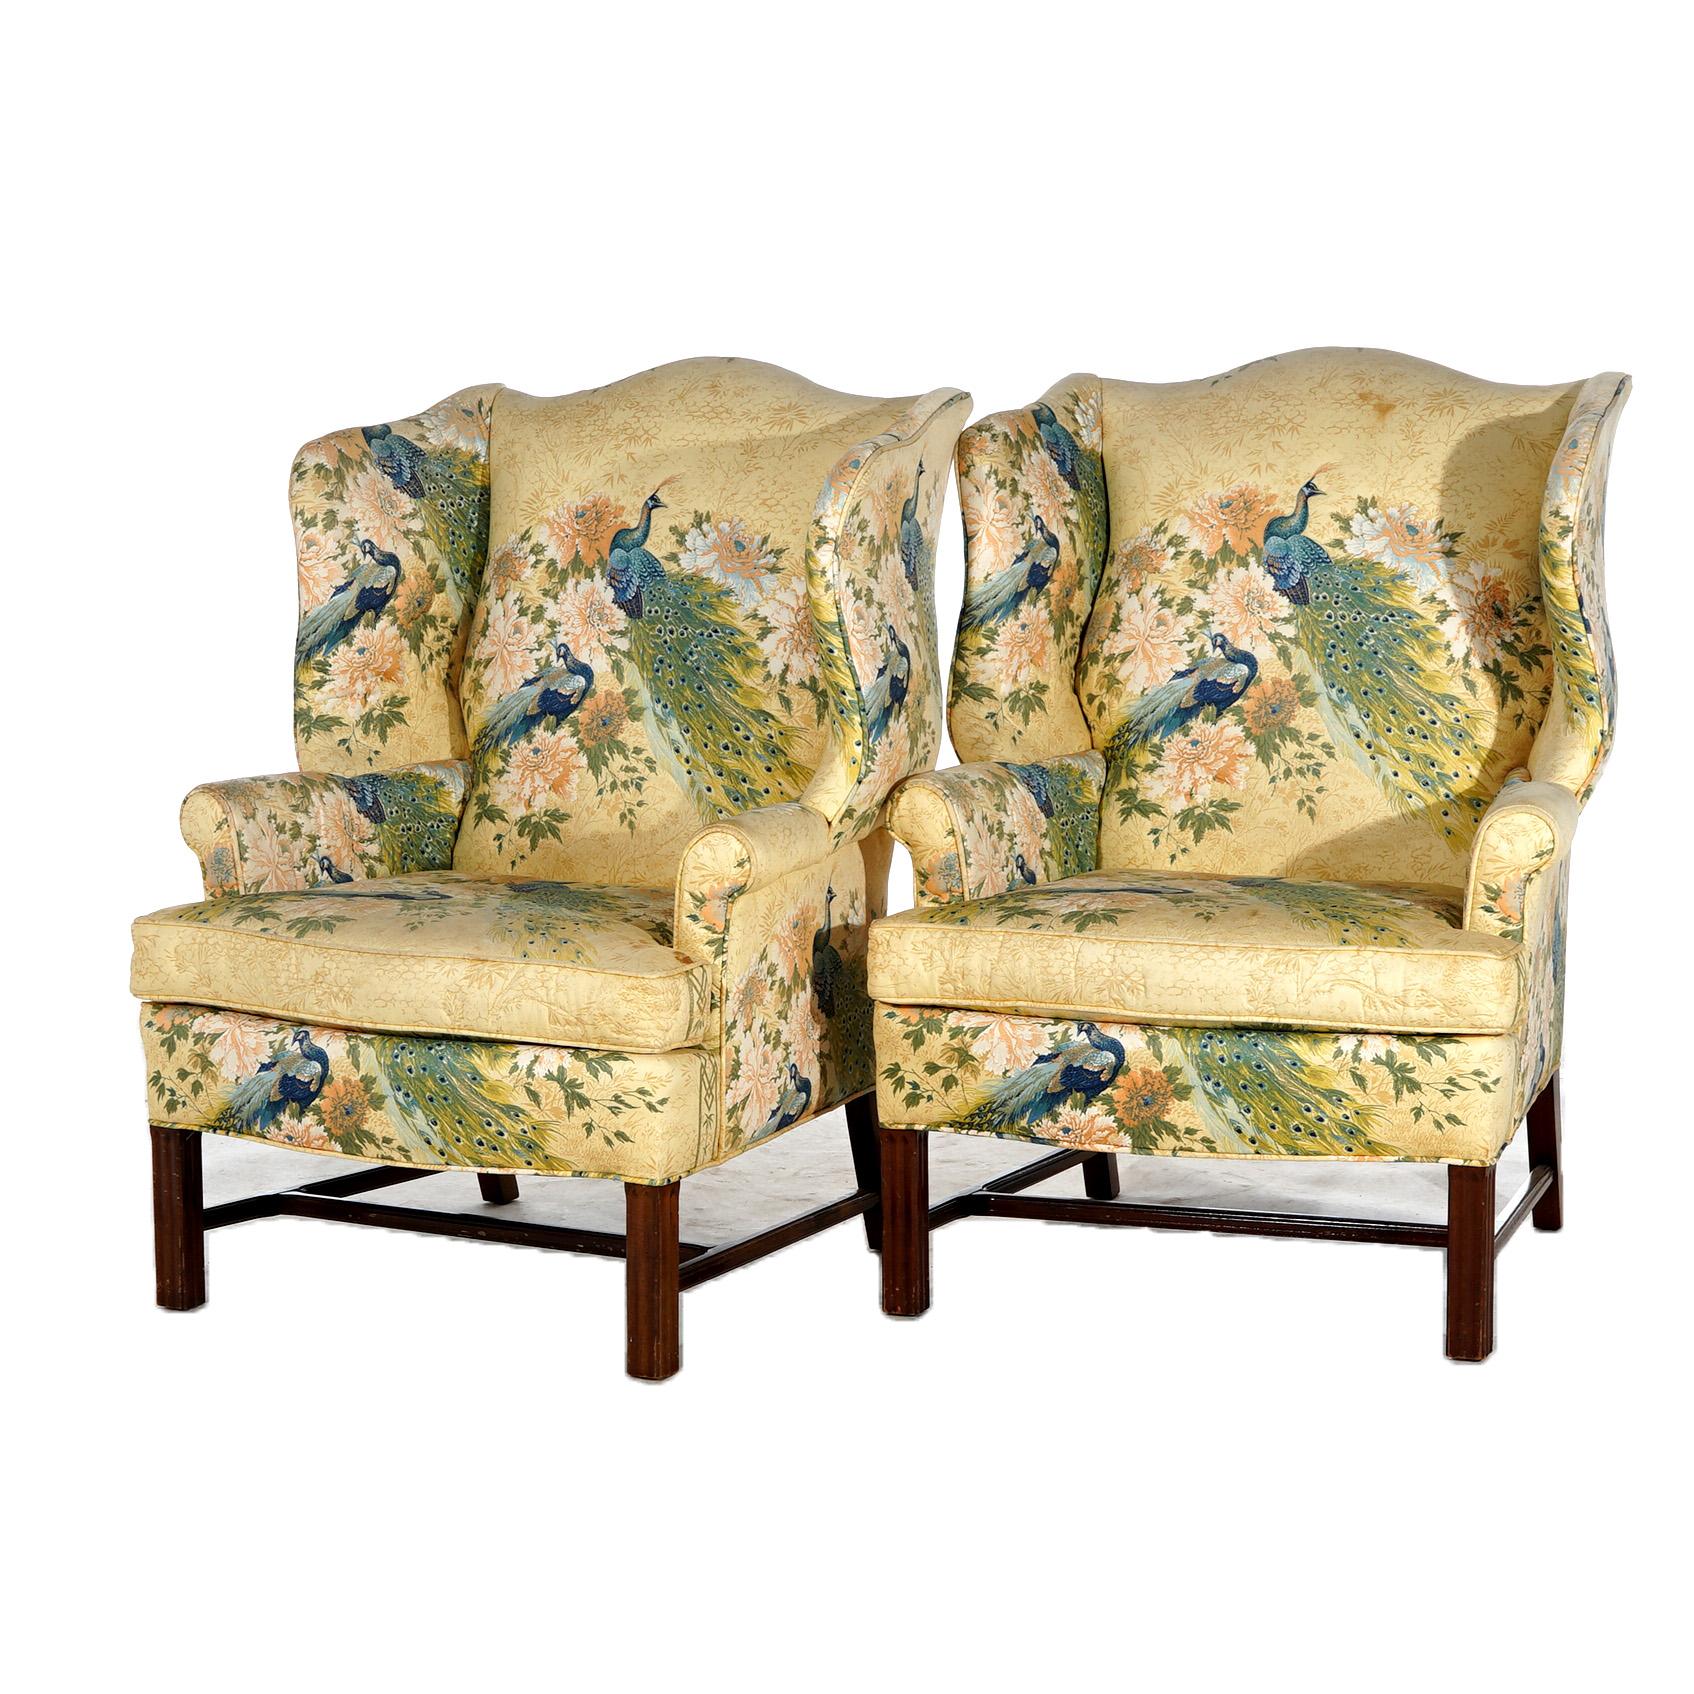 Upholstery Pair of English Colonial Peacock & Floral Decorated Wing Back Chairs 20thC For Sale